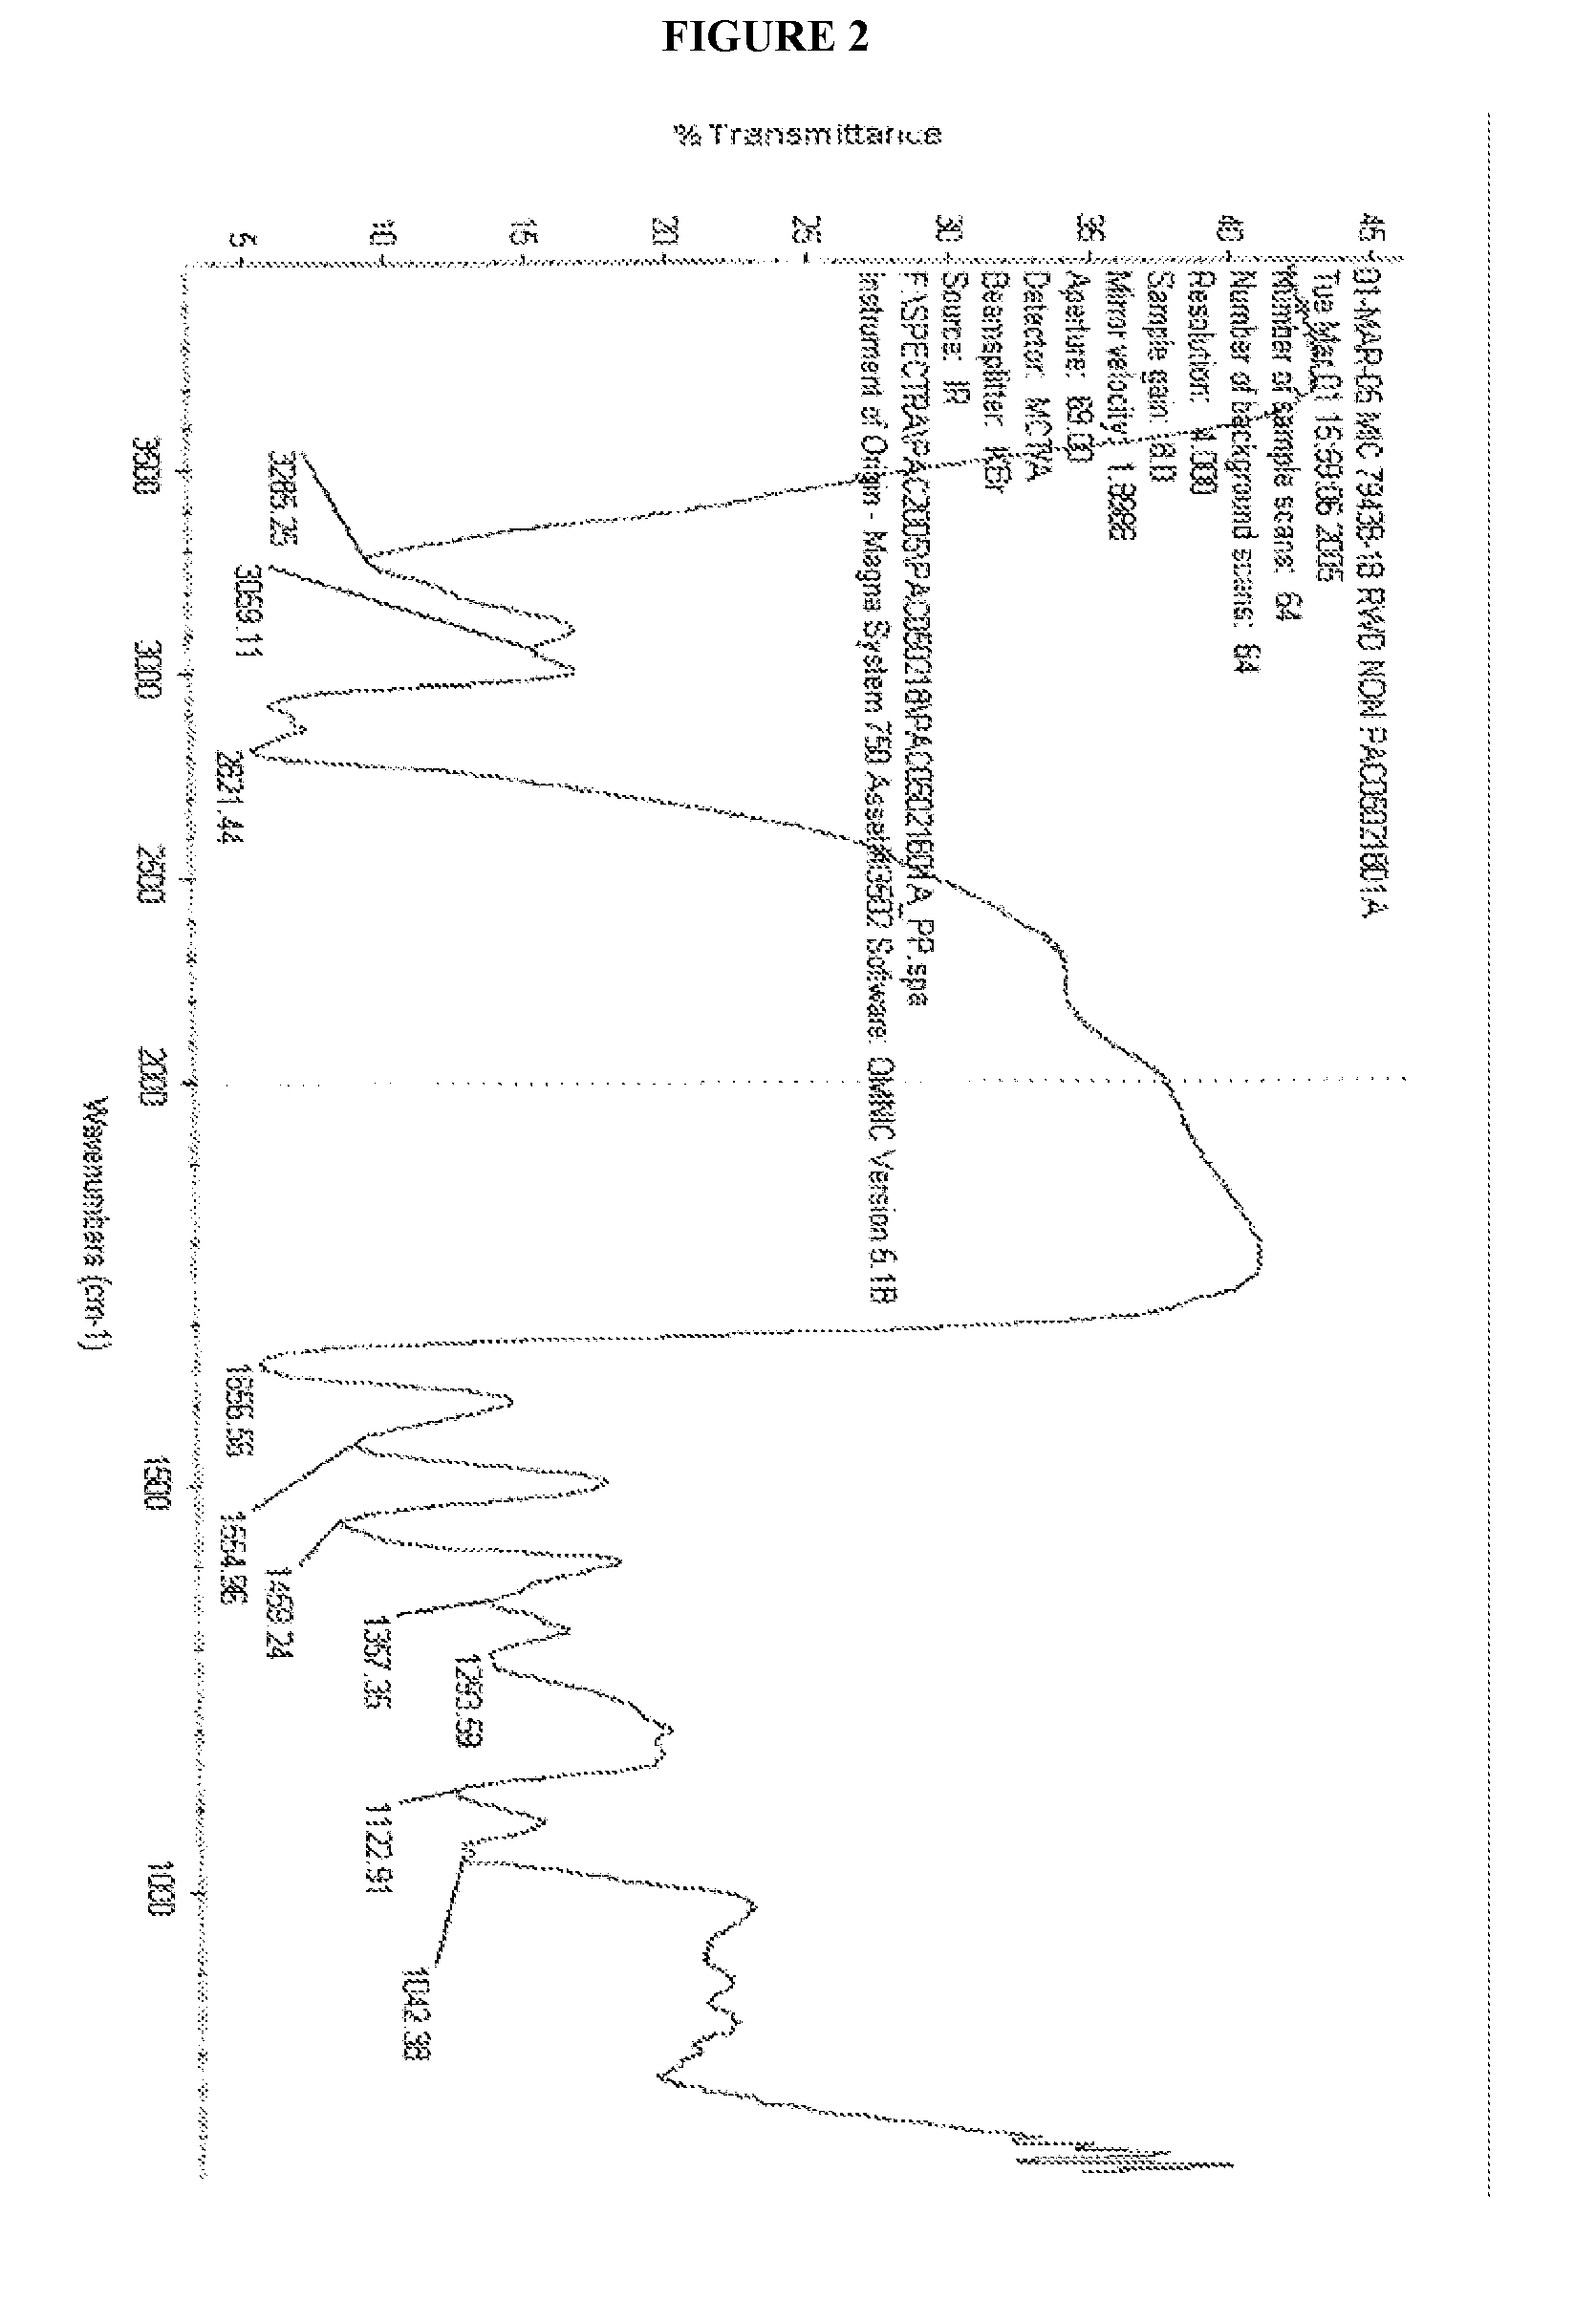 CHEMICALLY MODIFIED POLYCATION POLYMER FOR siRNA DELIVERY